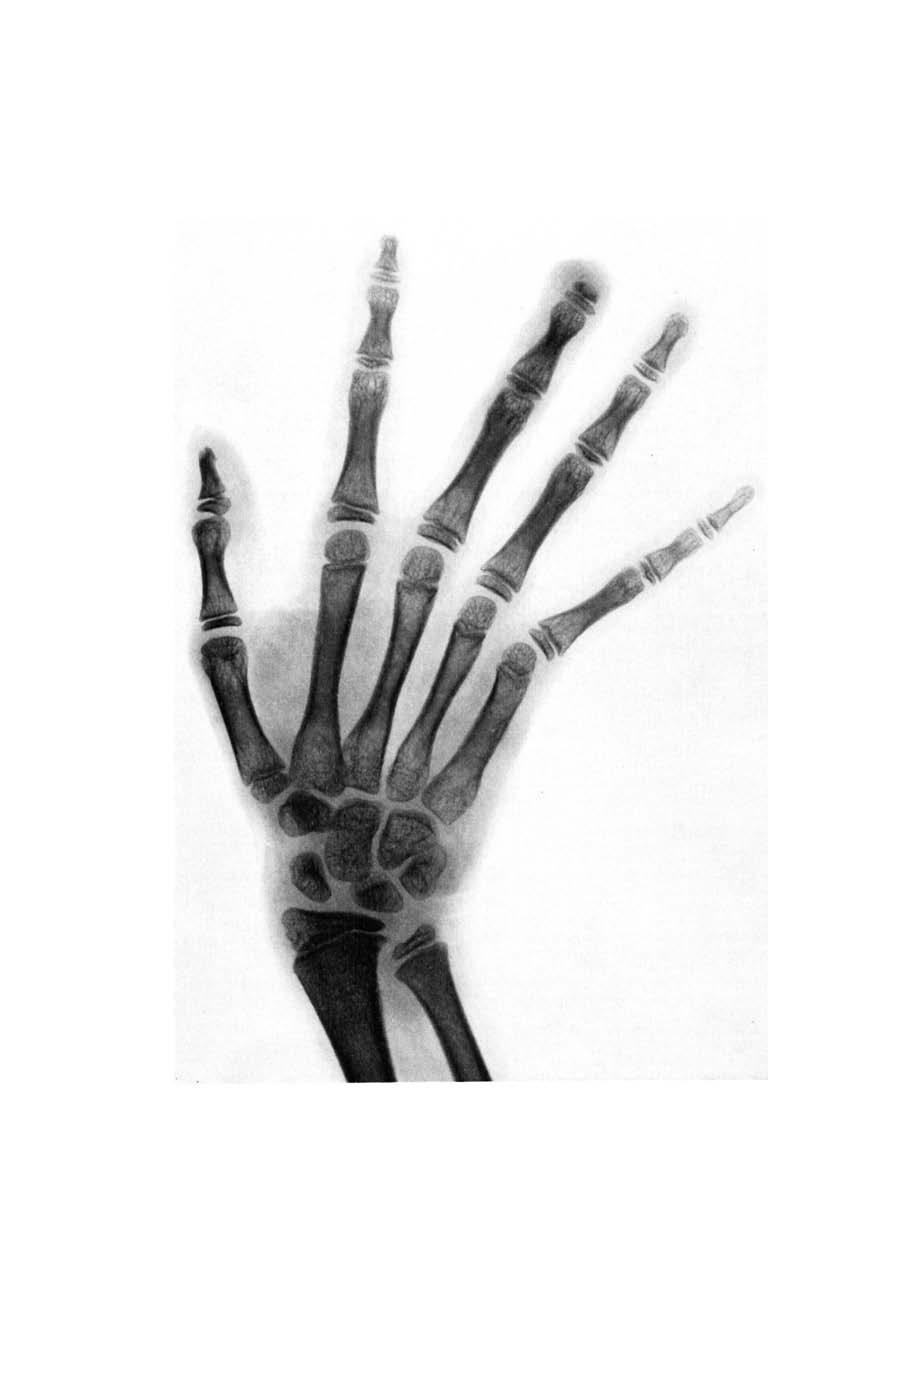 80 LEPROSY REVIEW X-ray of right hand showing early